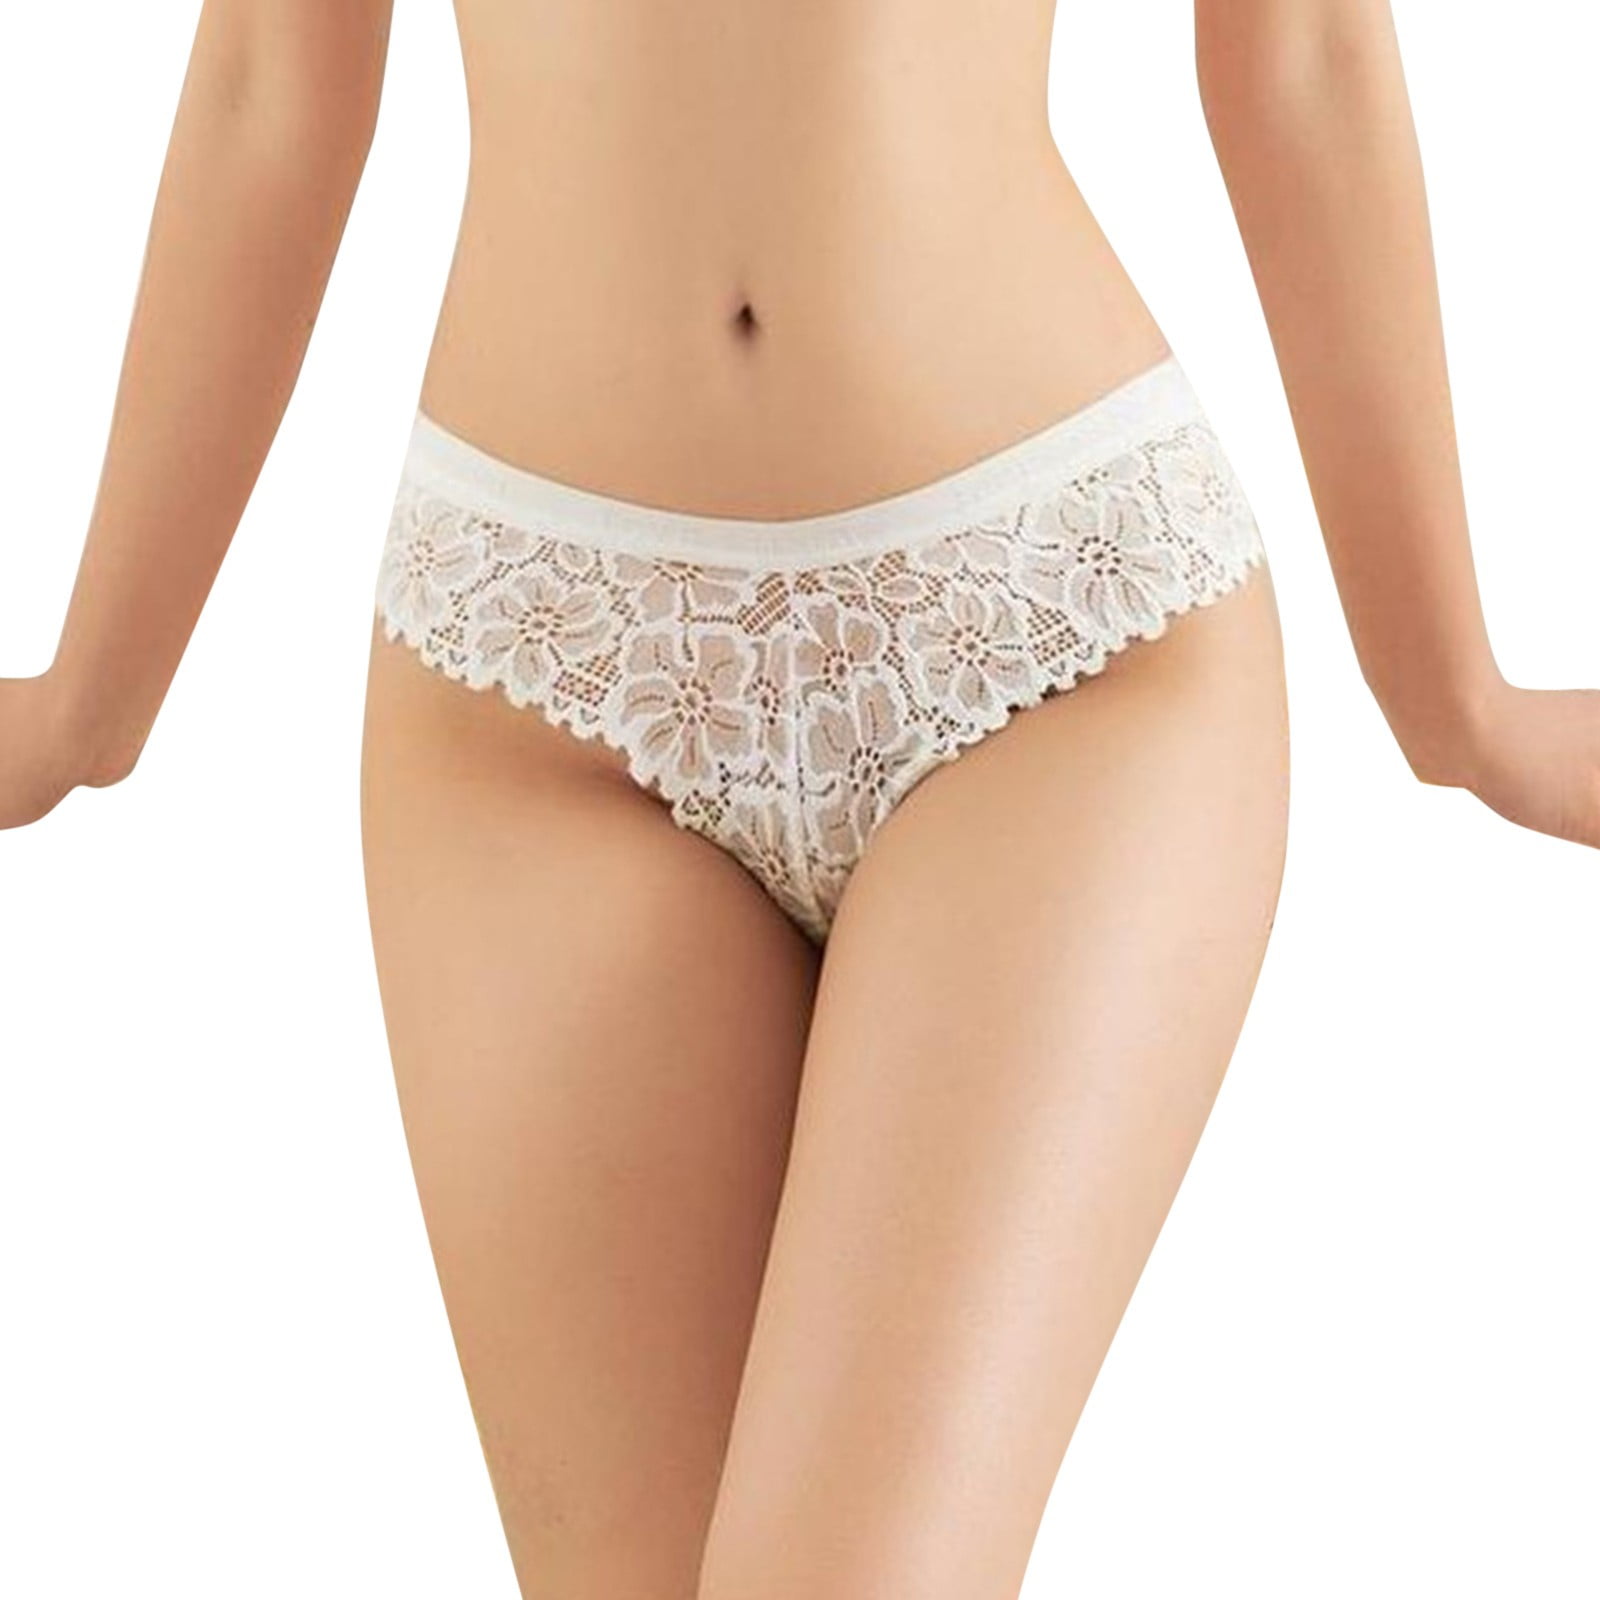 TAIAOJING 6 Pack Cotton Underwear For Women High Waisted Lace